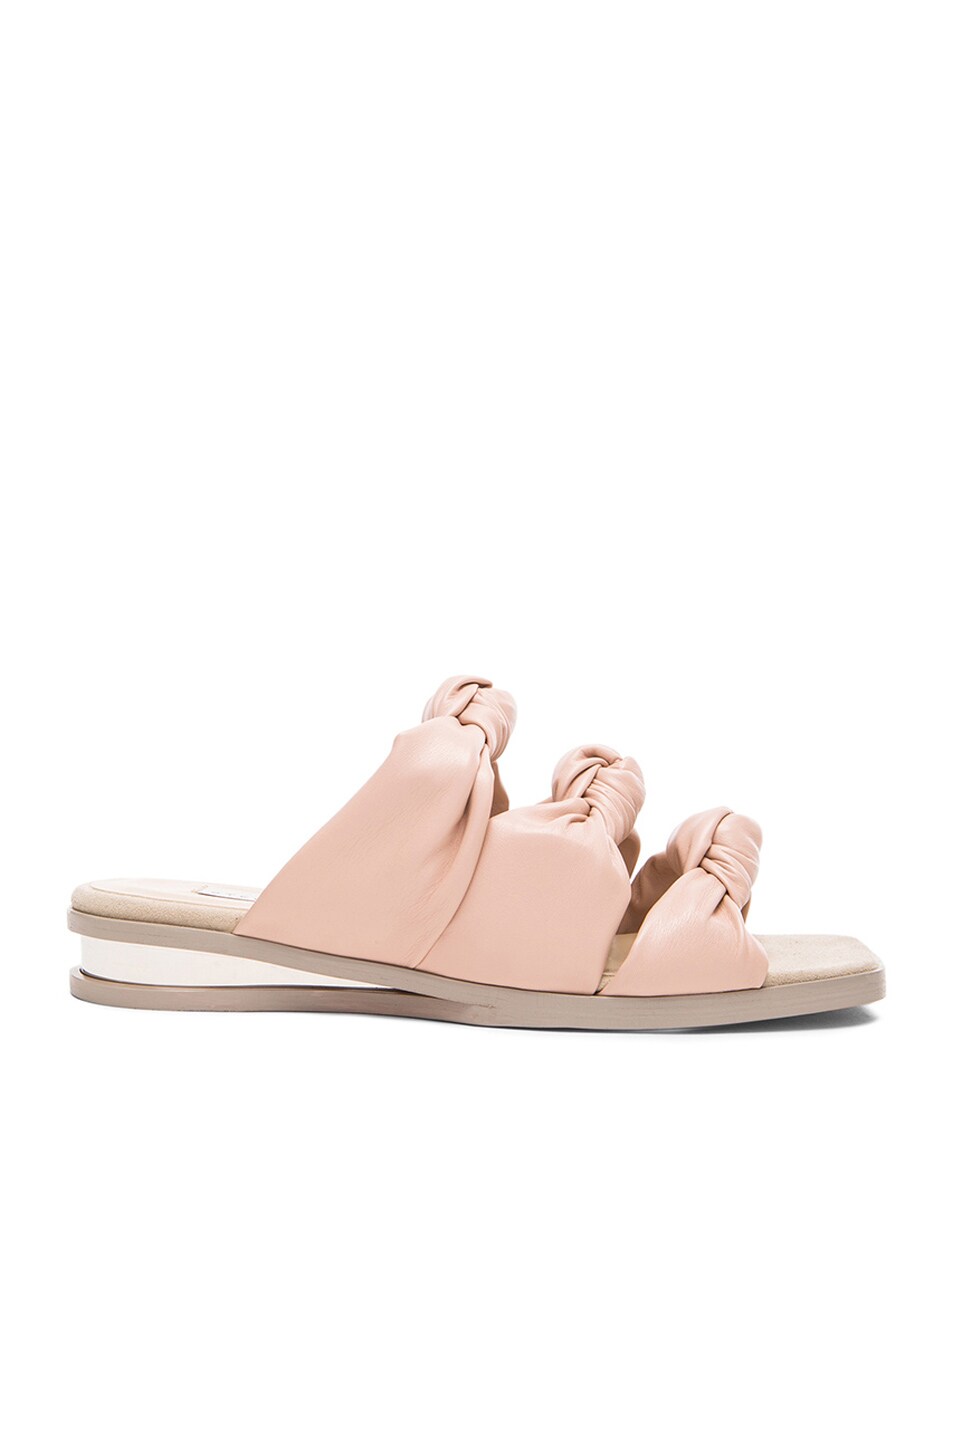 Image 1 of Stella McCartney Knot Faux Leather Sandals in Powder Rose